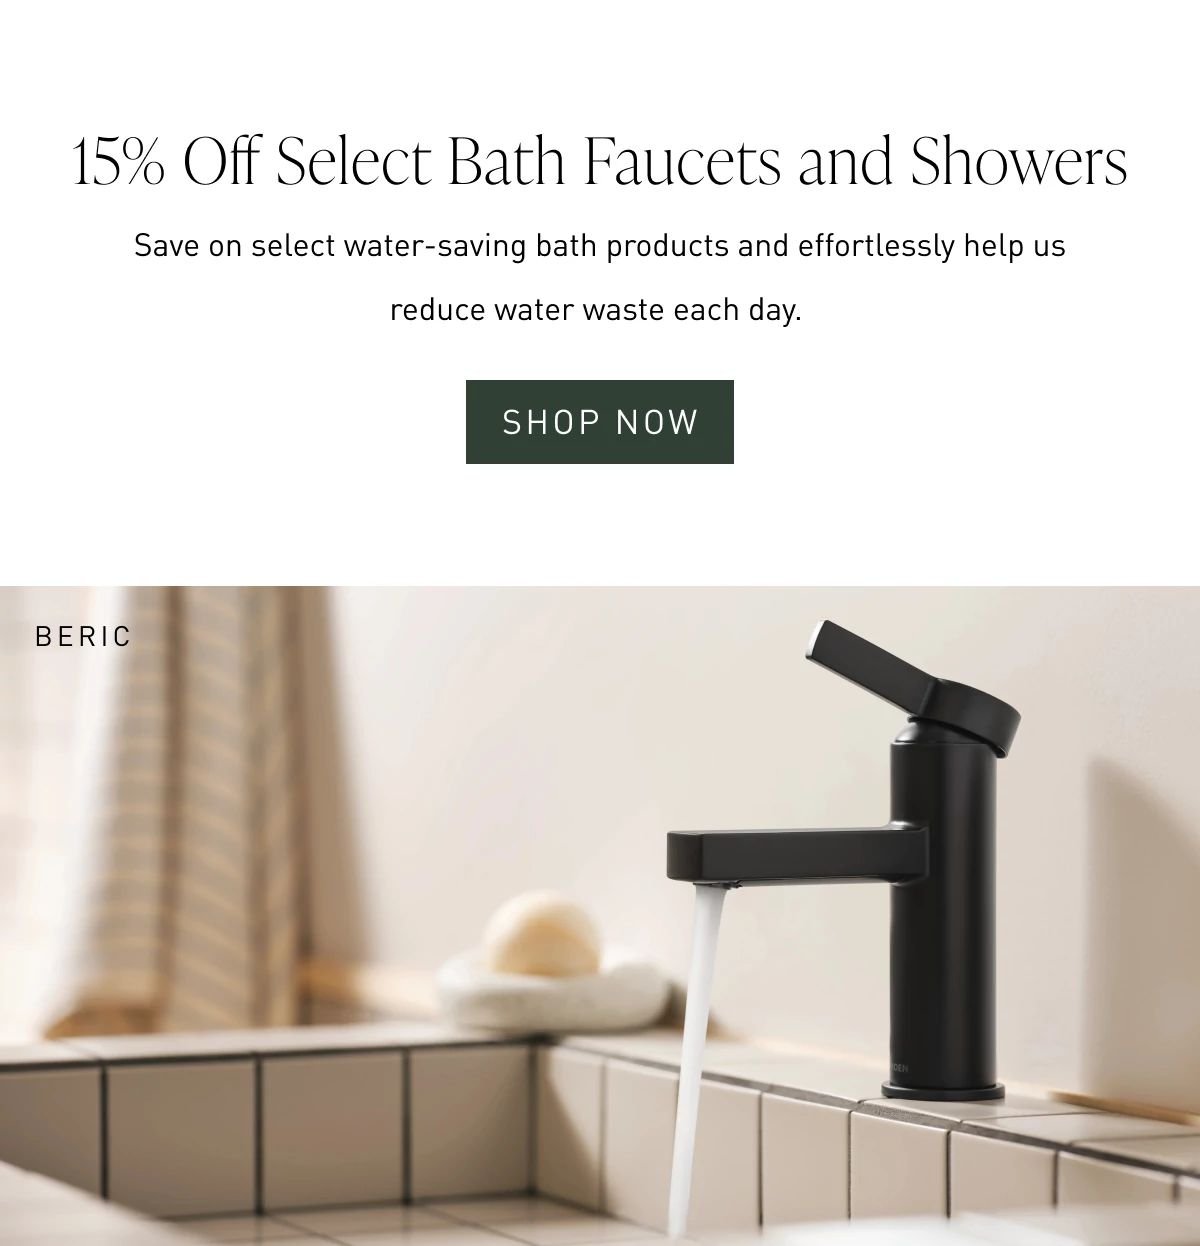 15% Off Select Bath Faucets and Showers | Save on select water-saving bath products and effortlessly help us reduce water waste each day. Shop Now >